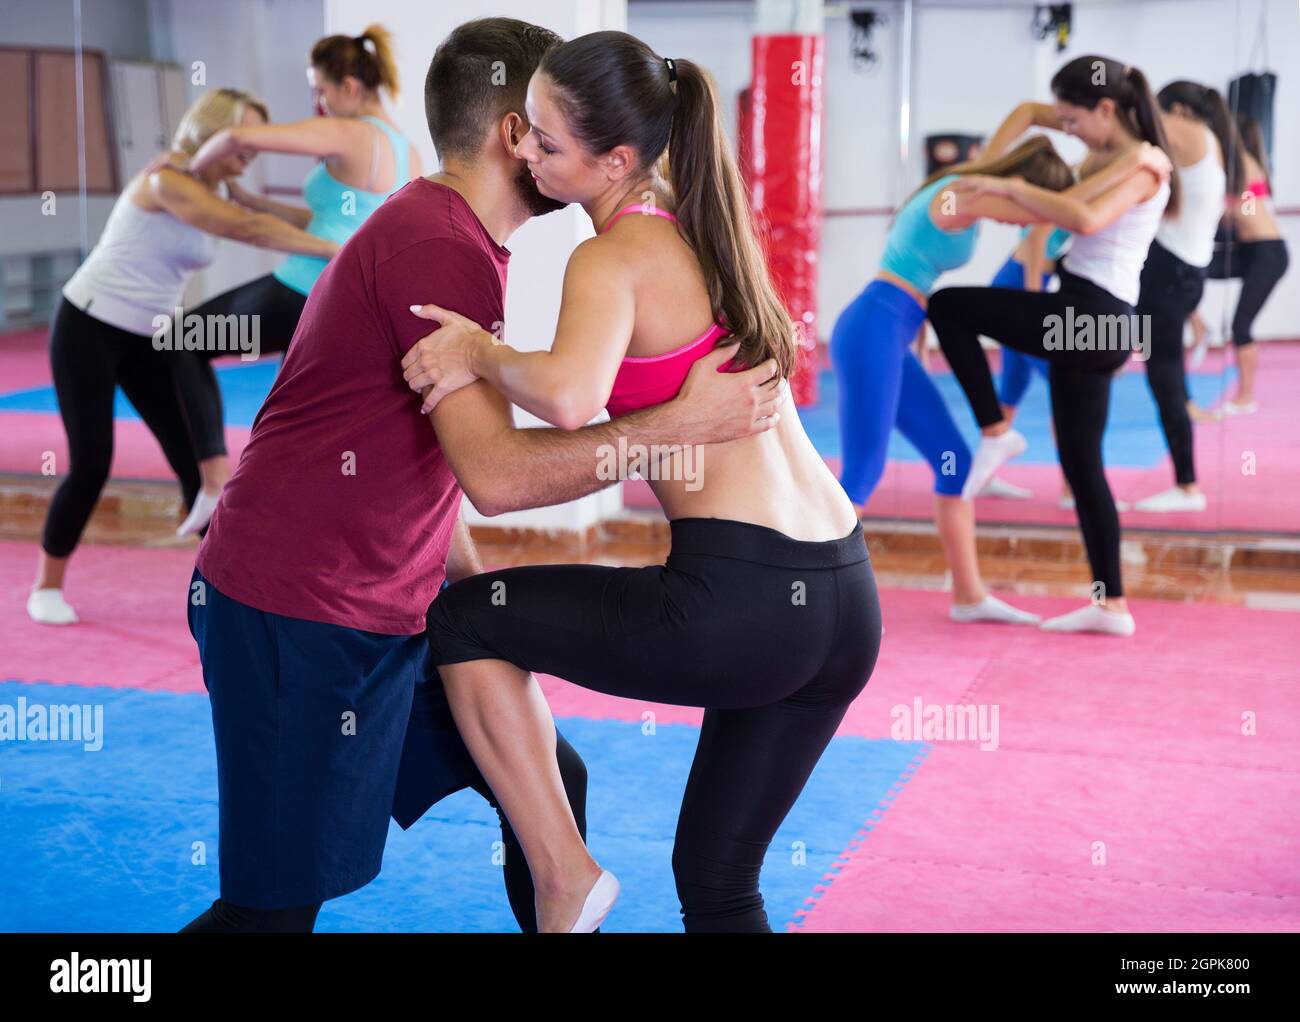 Women are doing self-defence-karate moves Stock Photo